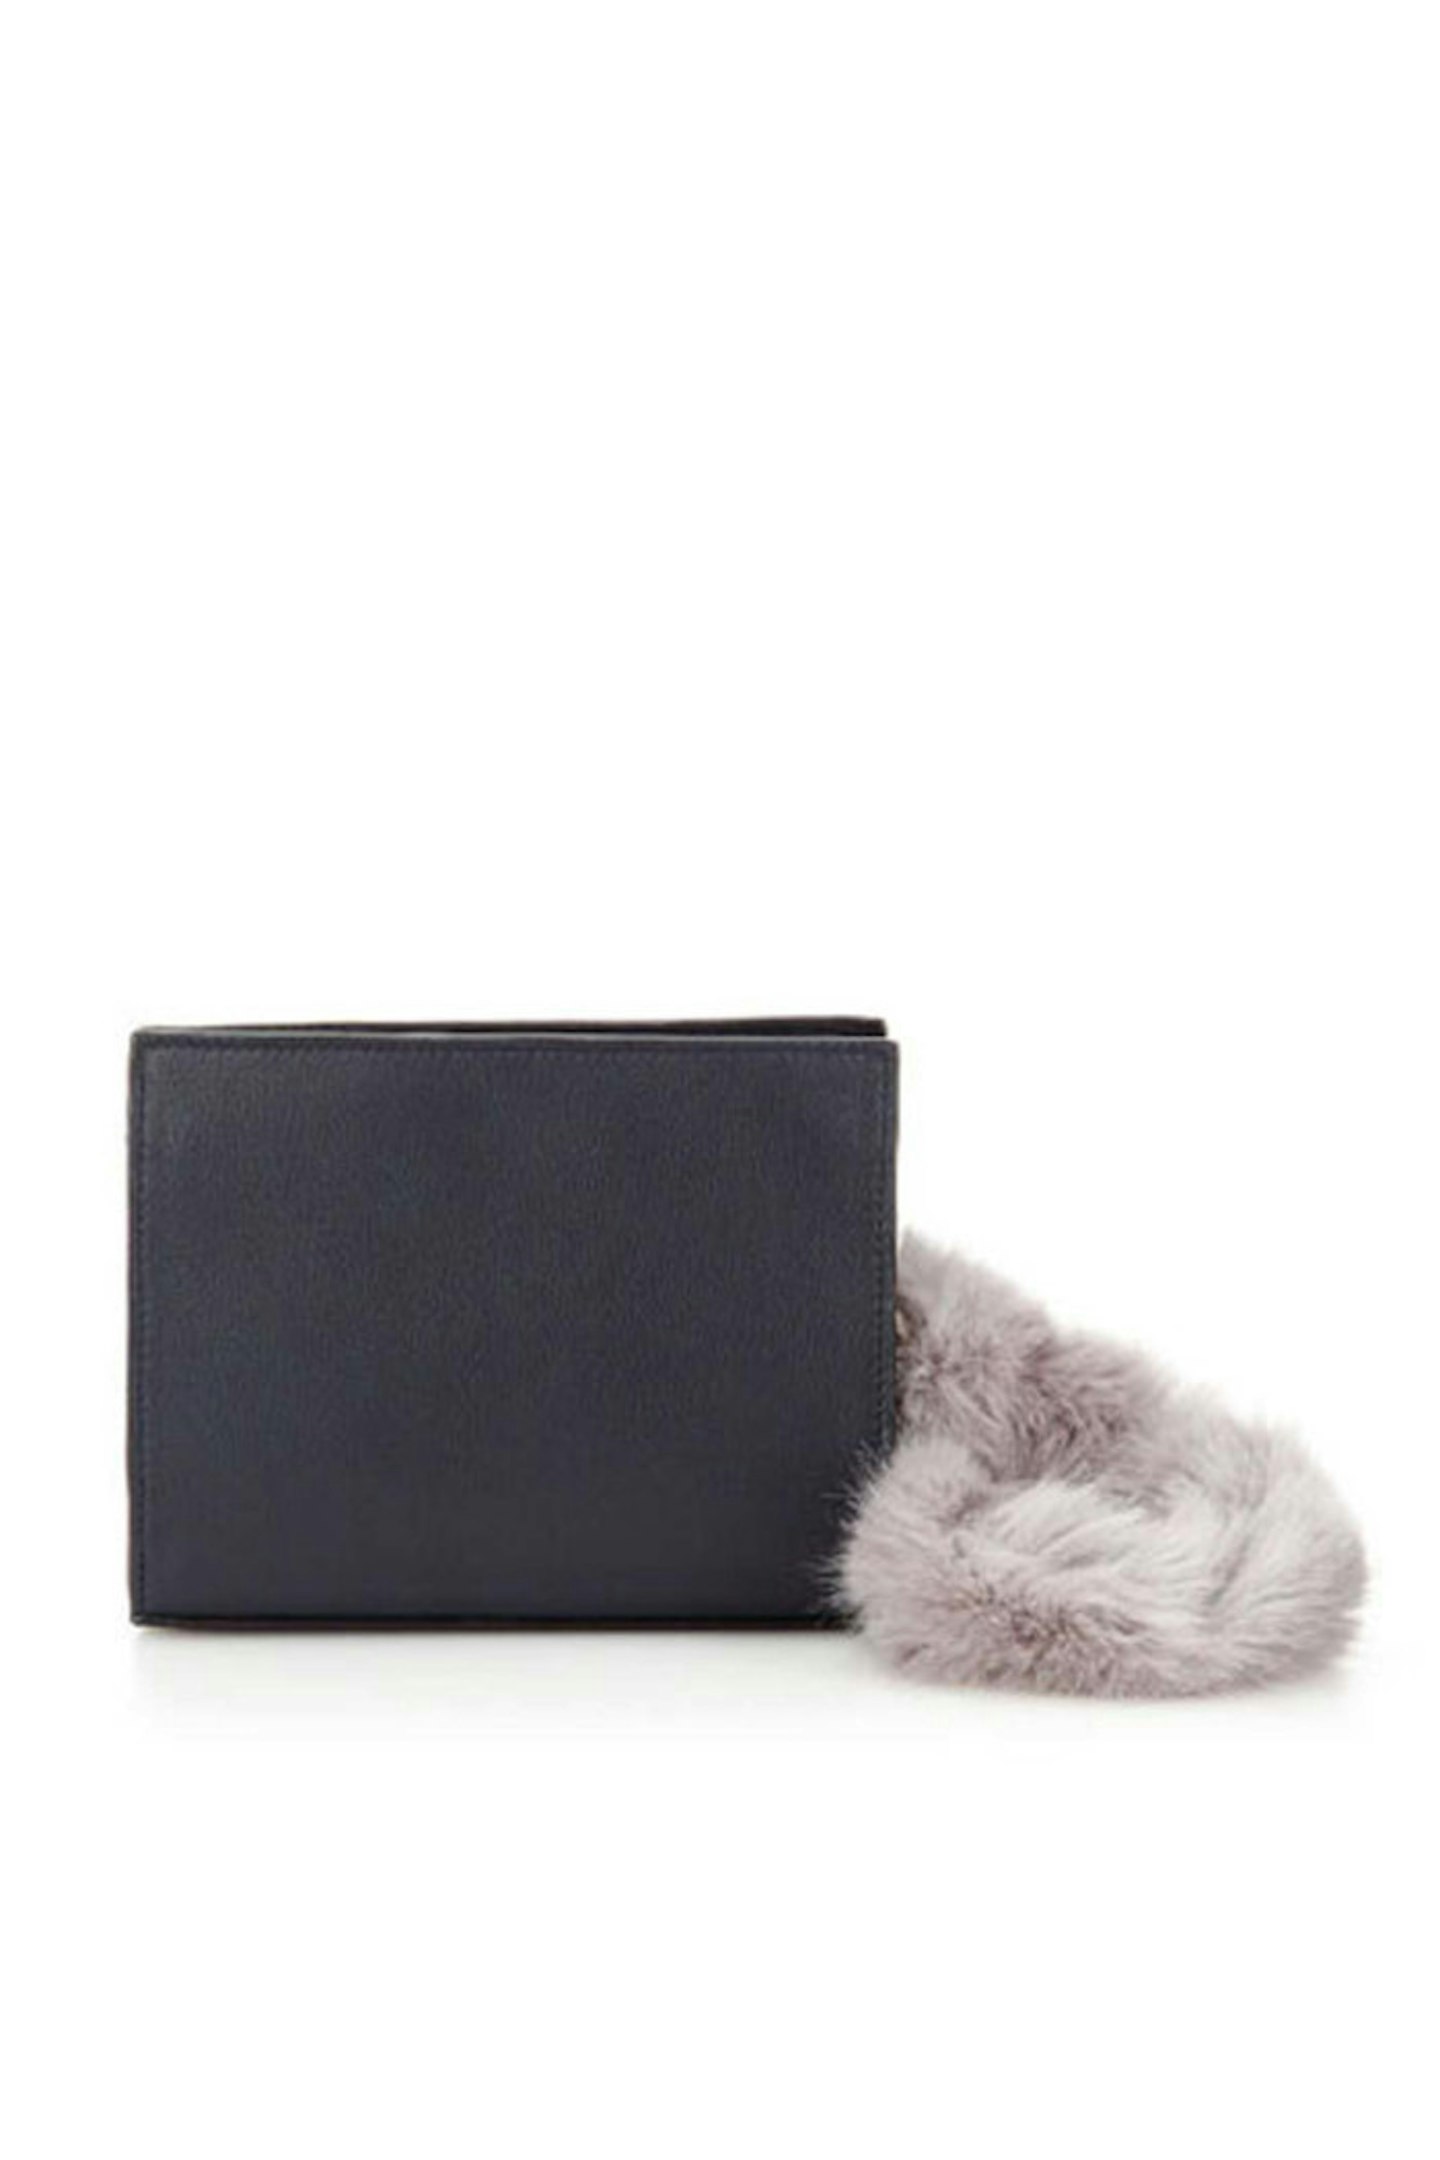 Clutch, £195, Whistles